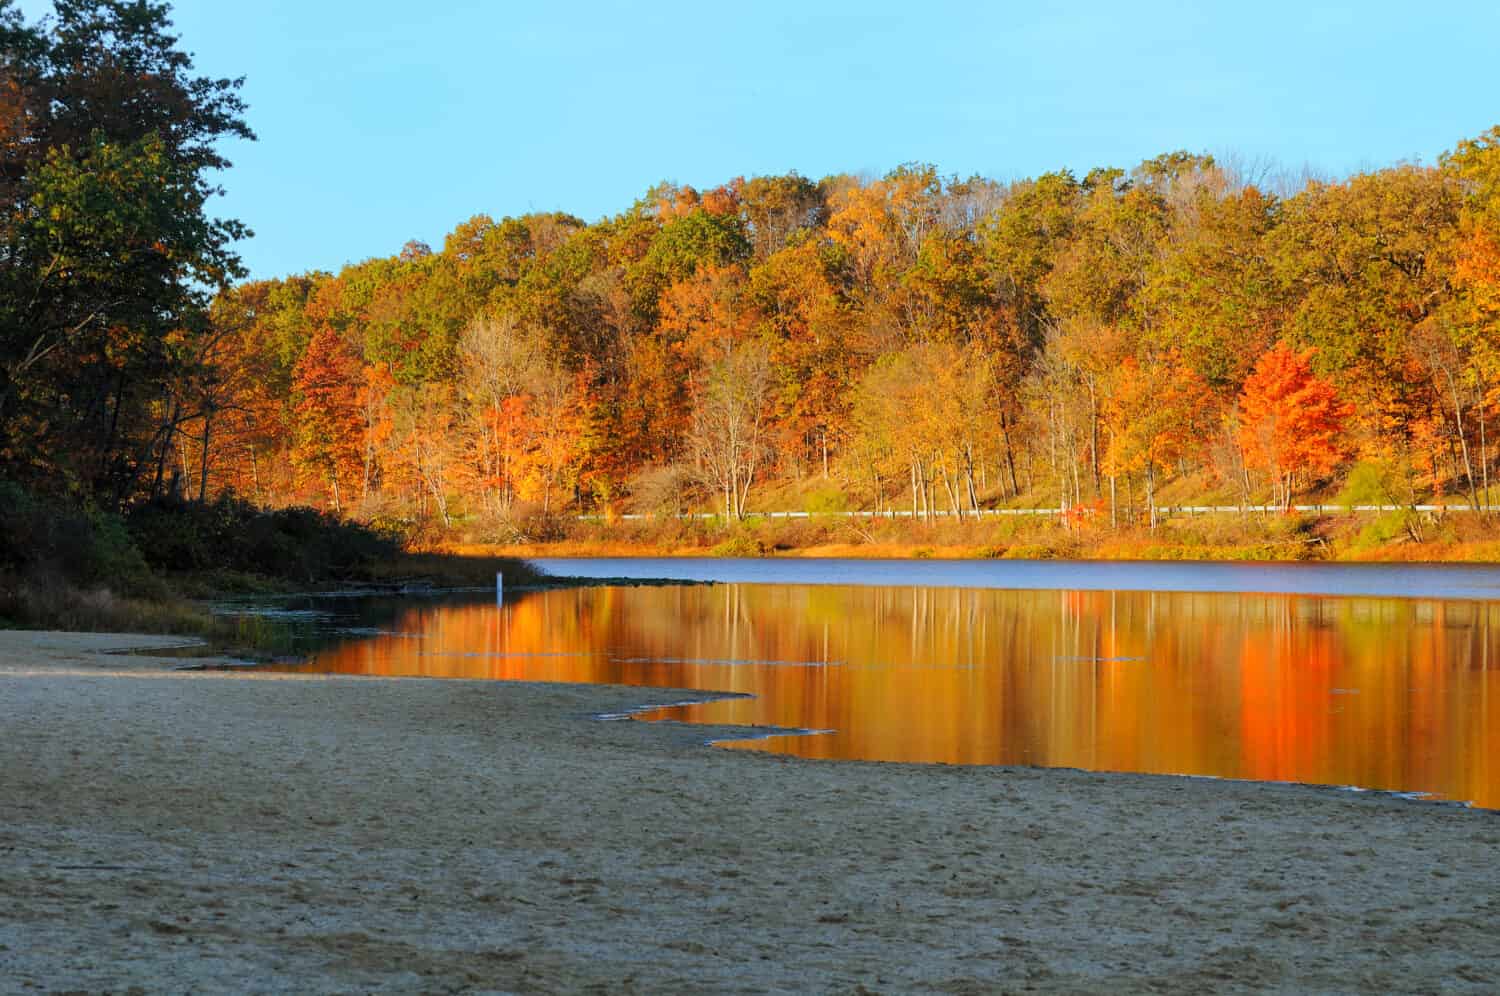 Brilliant autumn colors reflected in a serene lake (Punderson Lake in northeast Ohio)